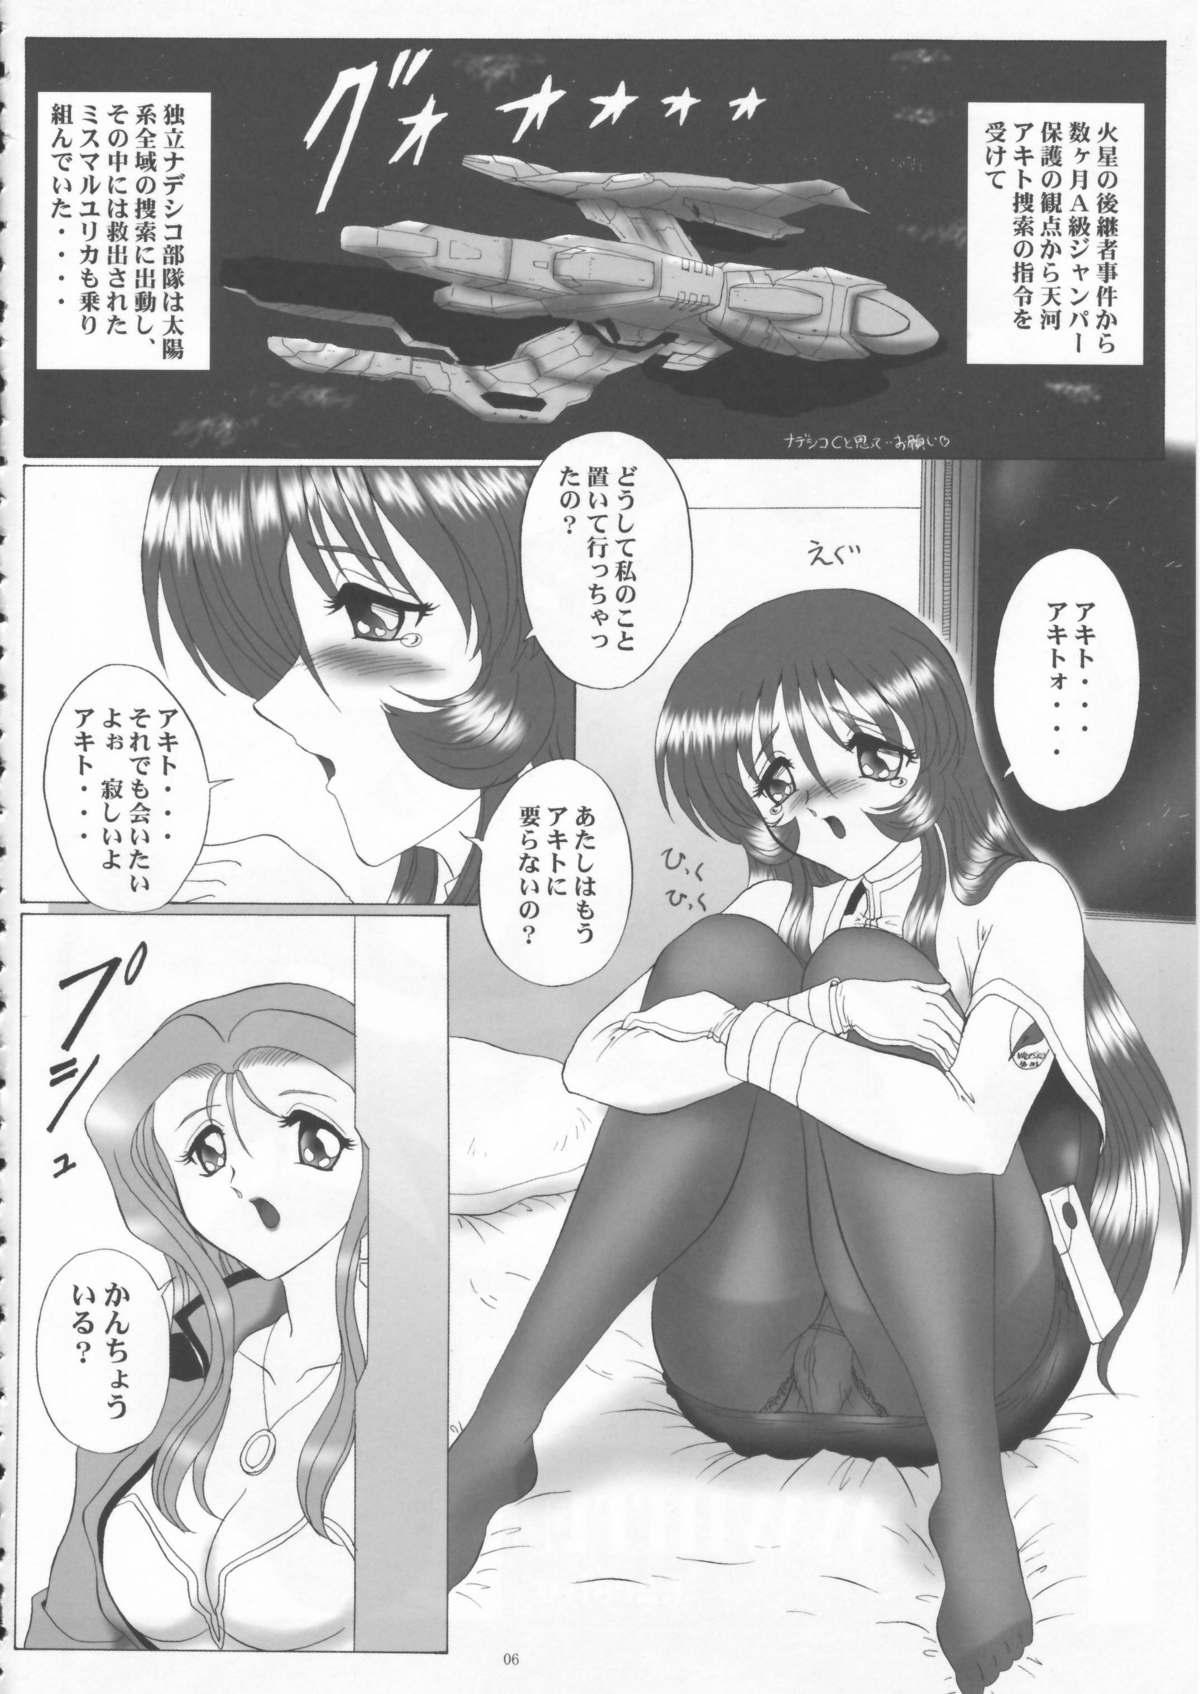 Brother YURIKA - Martian successor nadesico Interview - Page 6